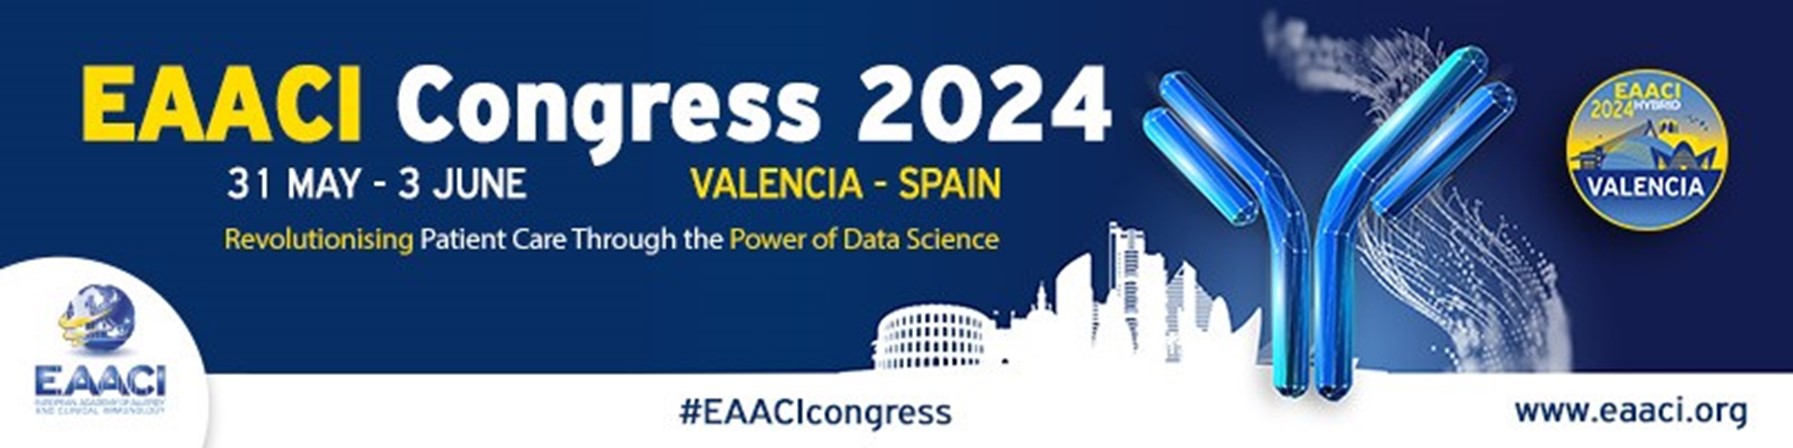 Dr. María José Torres, Head of the Allergology Department of the HRU of Malaga, new President of the EAACI